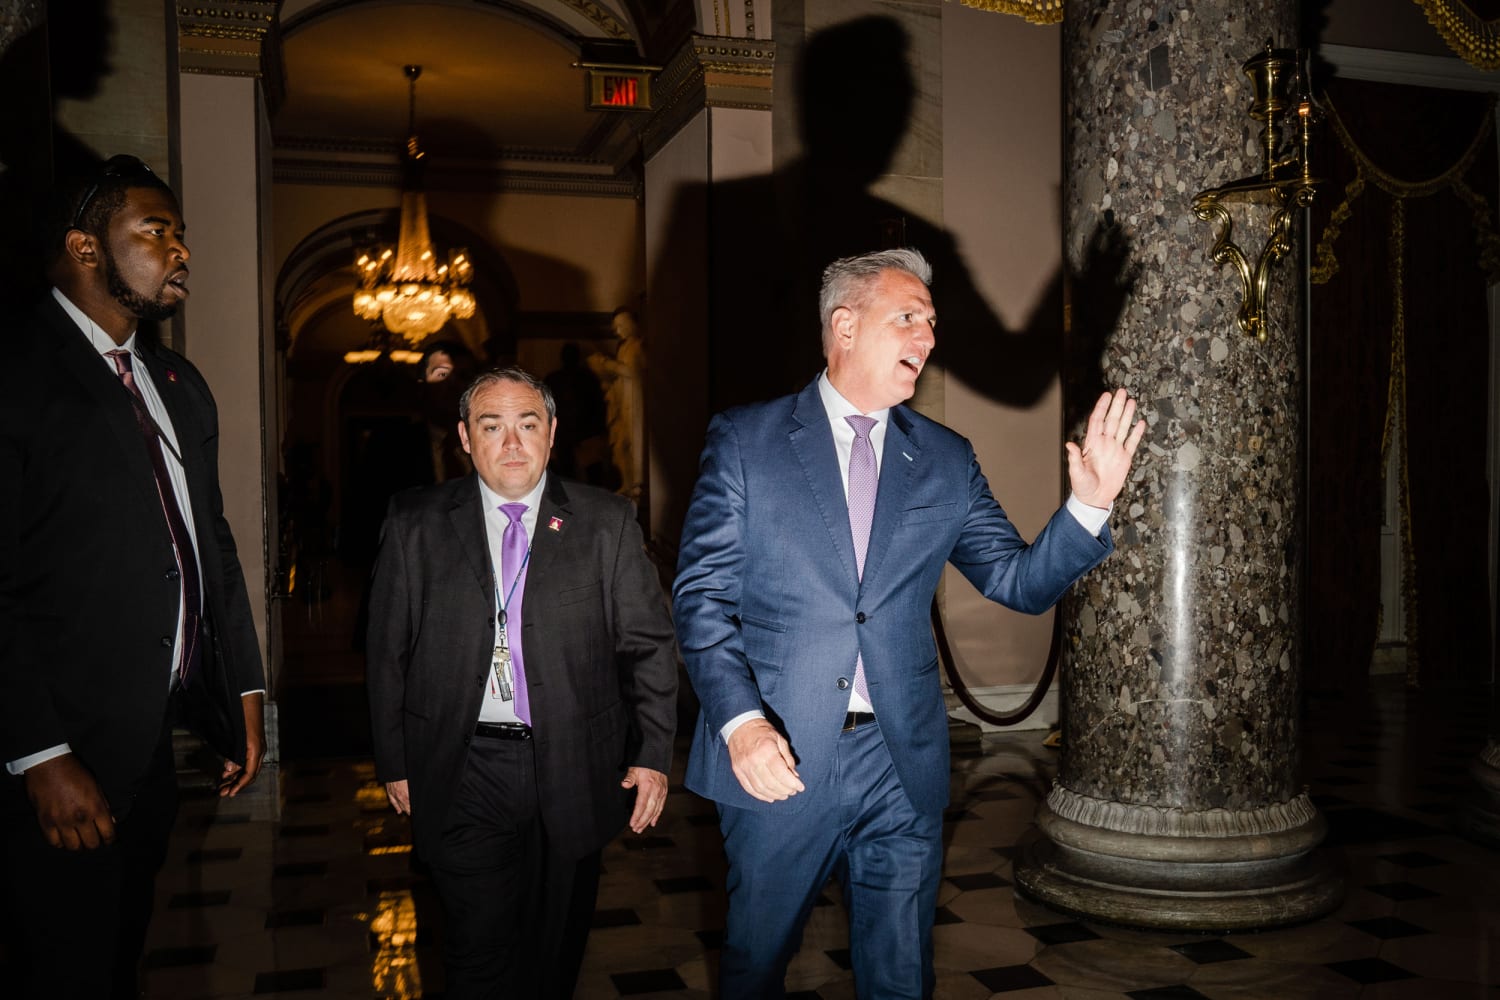 McCarthy's debt limit bill praised by GOP conservatives, but centrists are skeptical